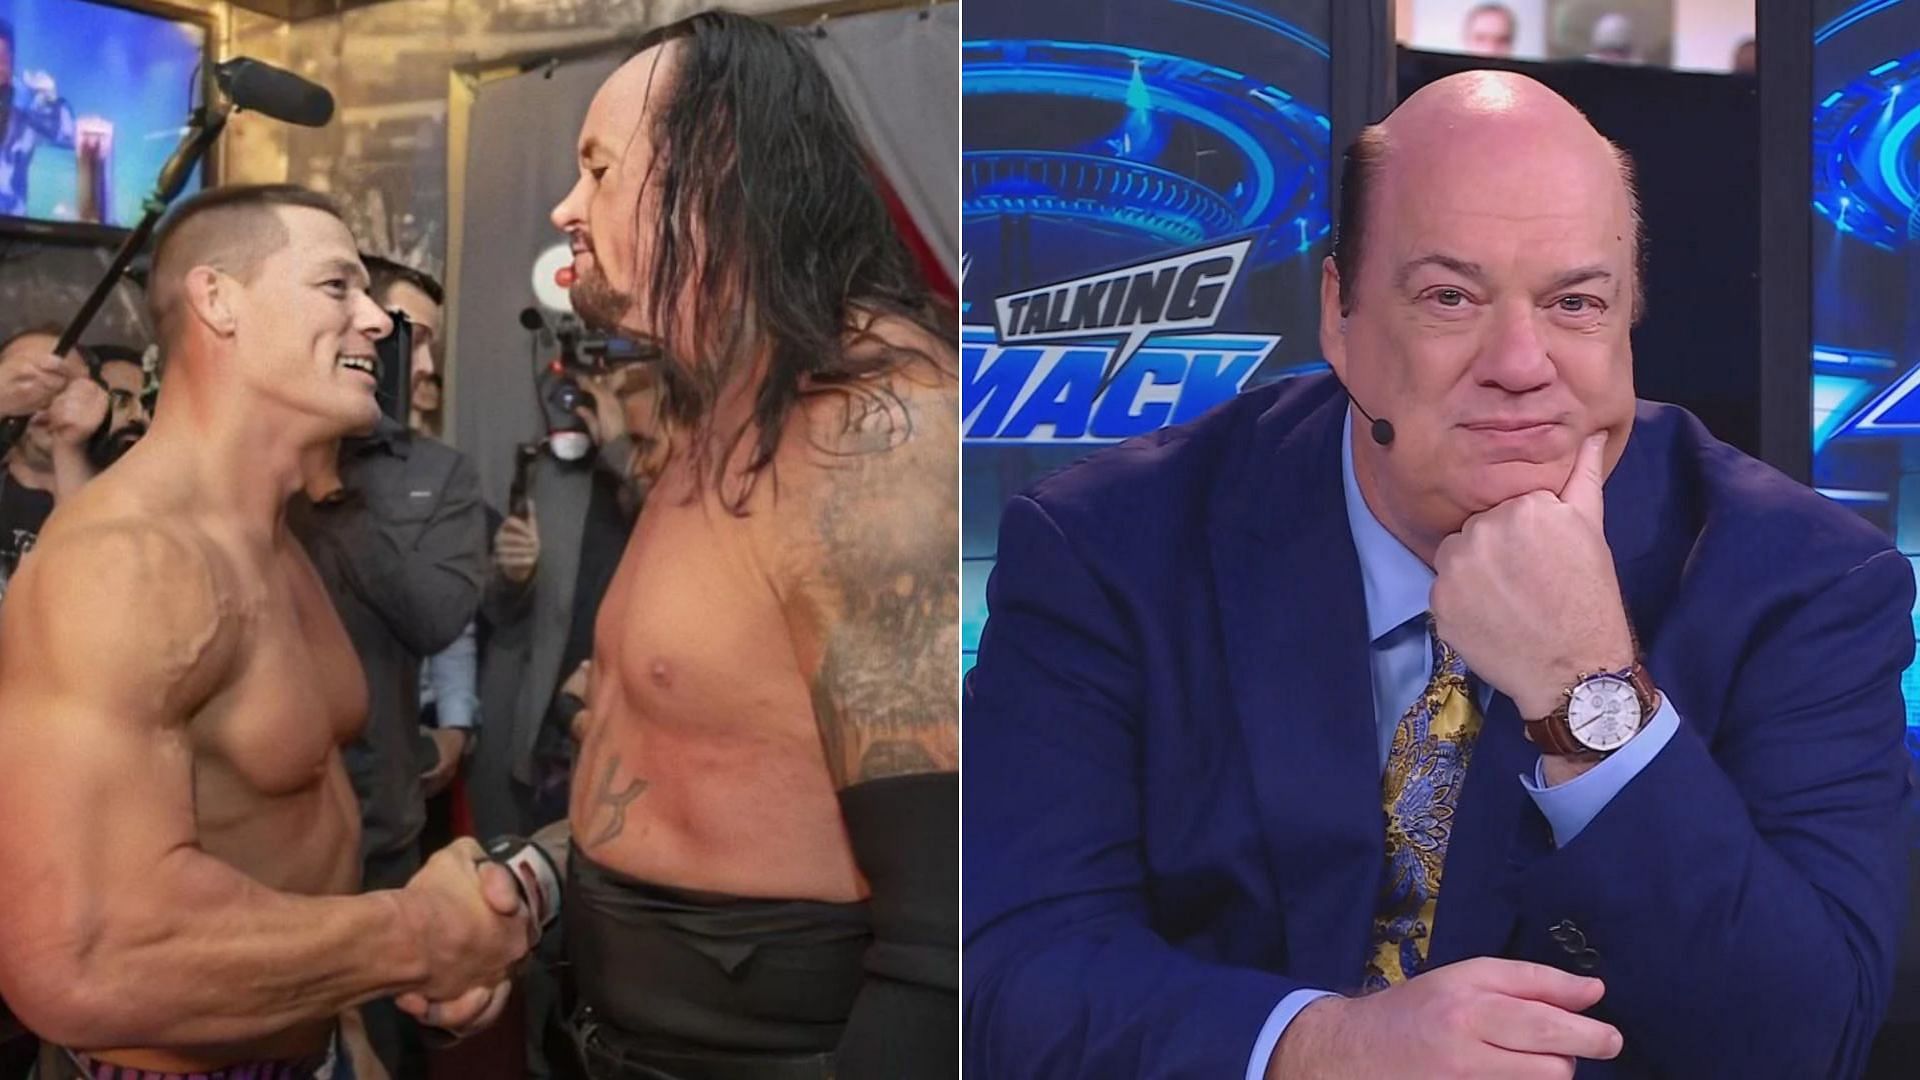 The Undertaker is a Hall of Famer; Heyman is the Chief Counsel to Roman Reigns